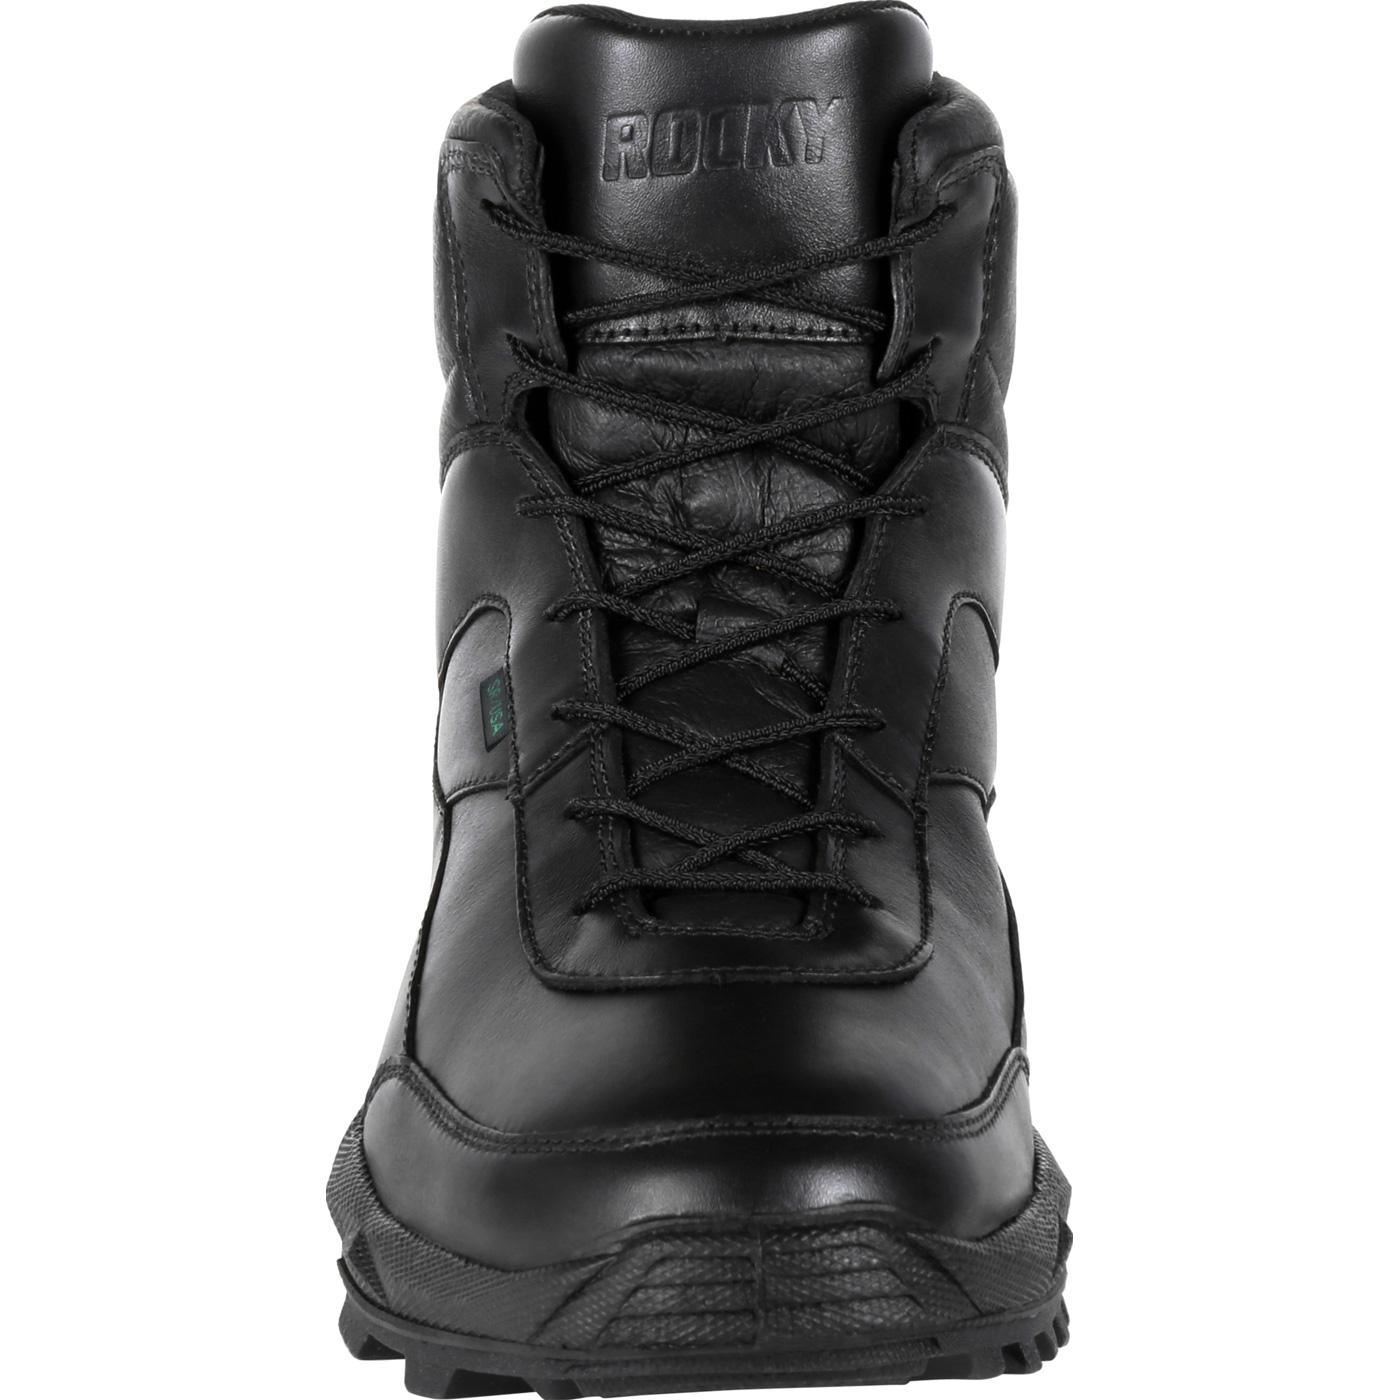 Rocky Priority Postal-Approved Duty Boot - Flyclothing LLC